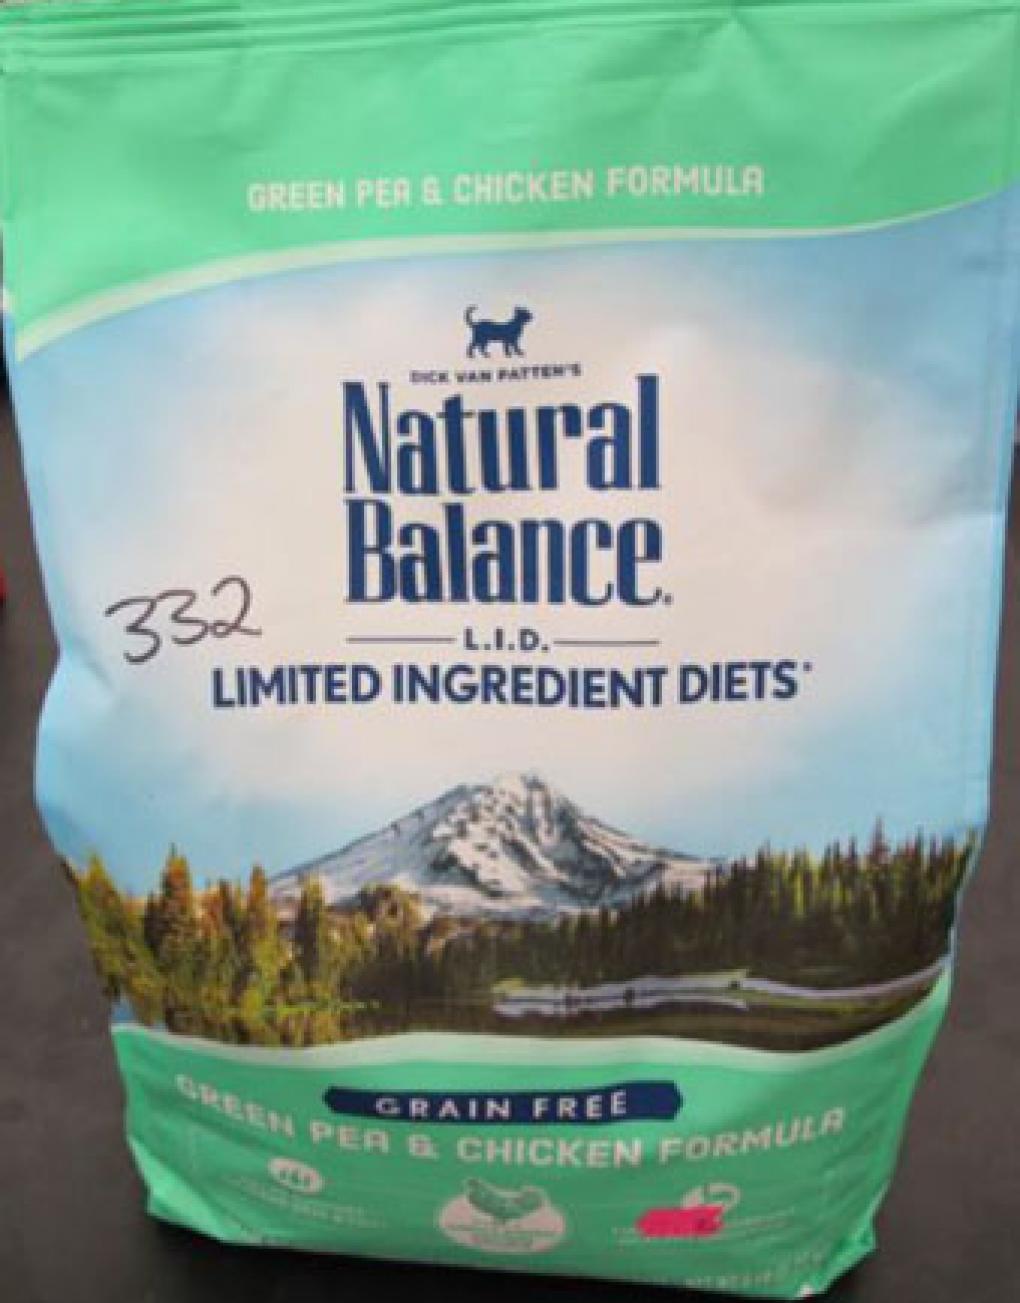 Natural Balance Pet Foods recalls LID. Green Pea & Chicken Dry Cat Formula due to Salmonella